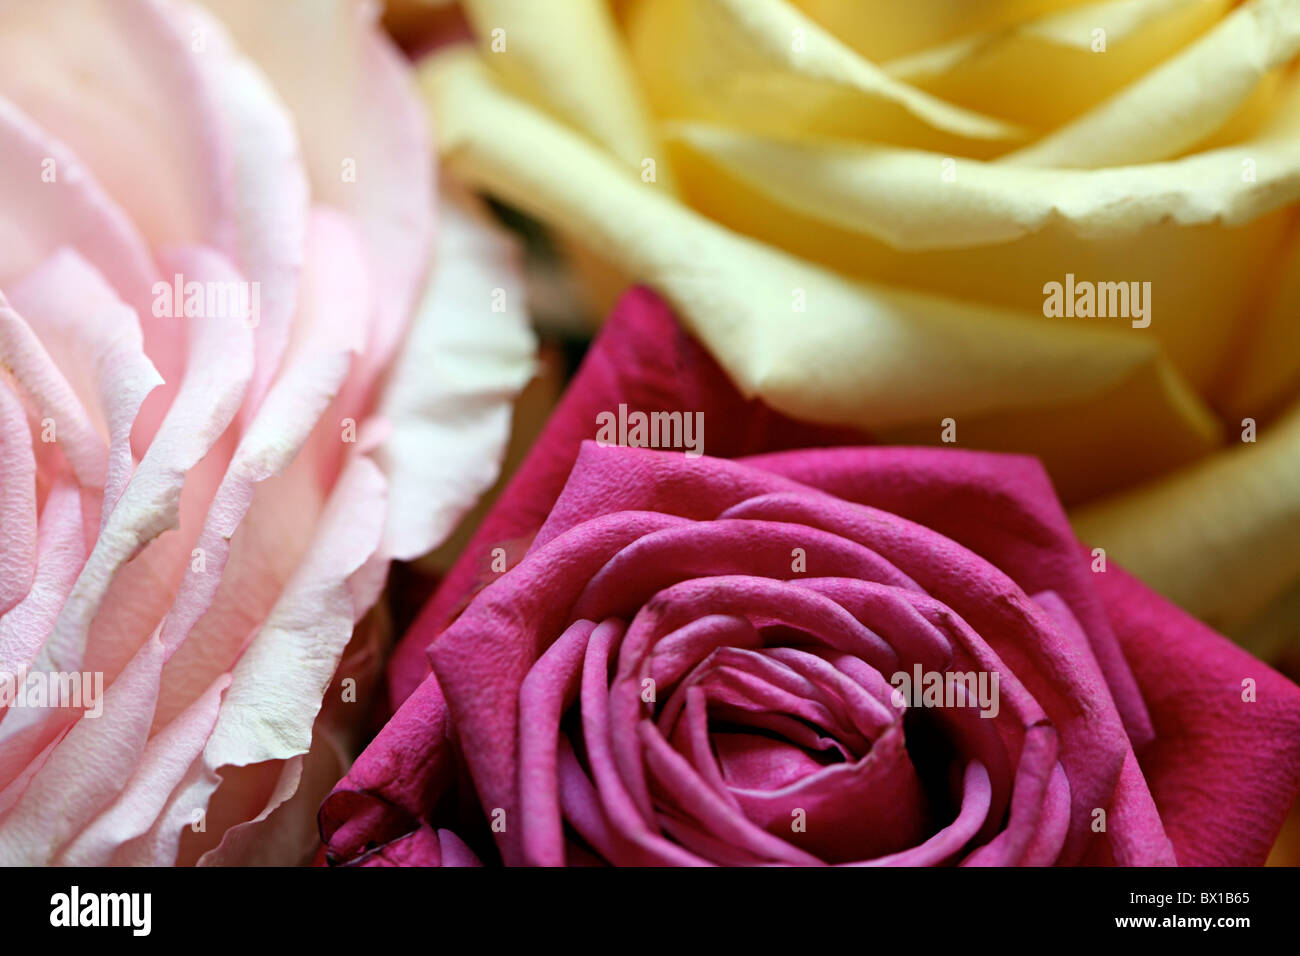 See Rosen High Resolution Stock Photography and Images - Alamy